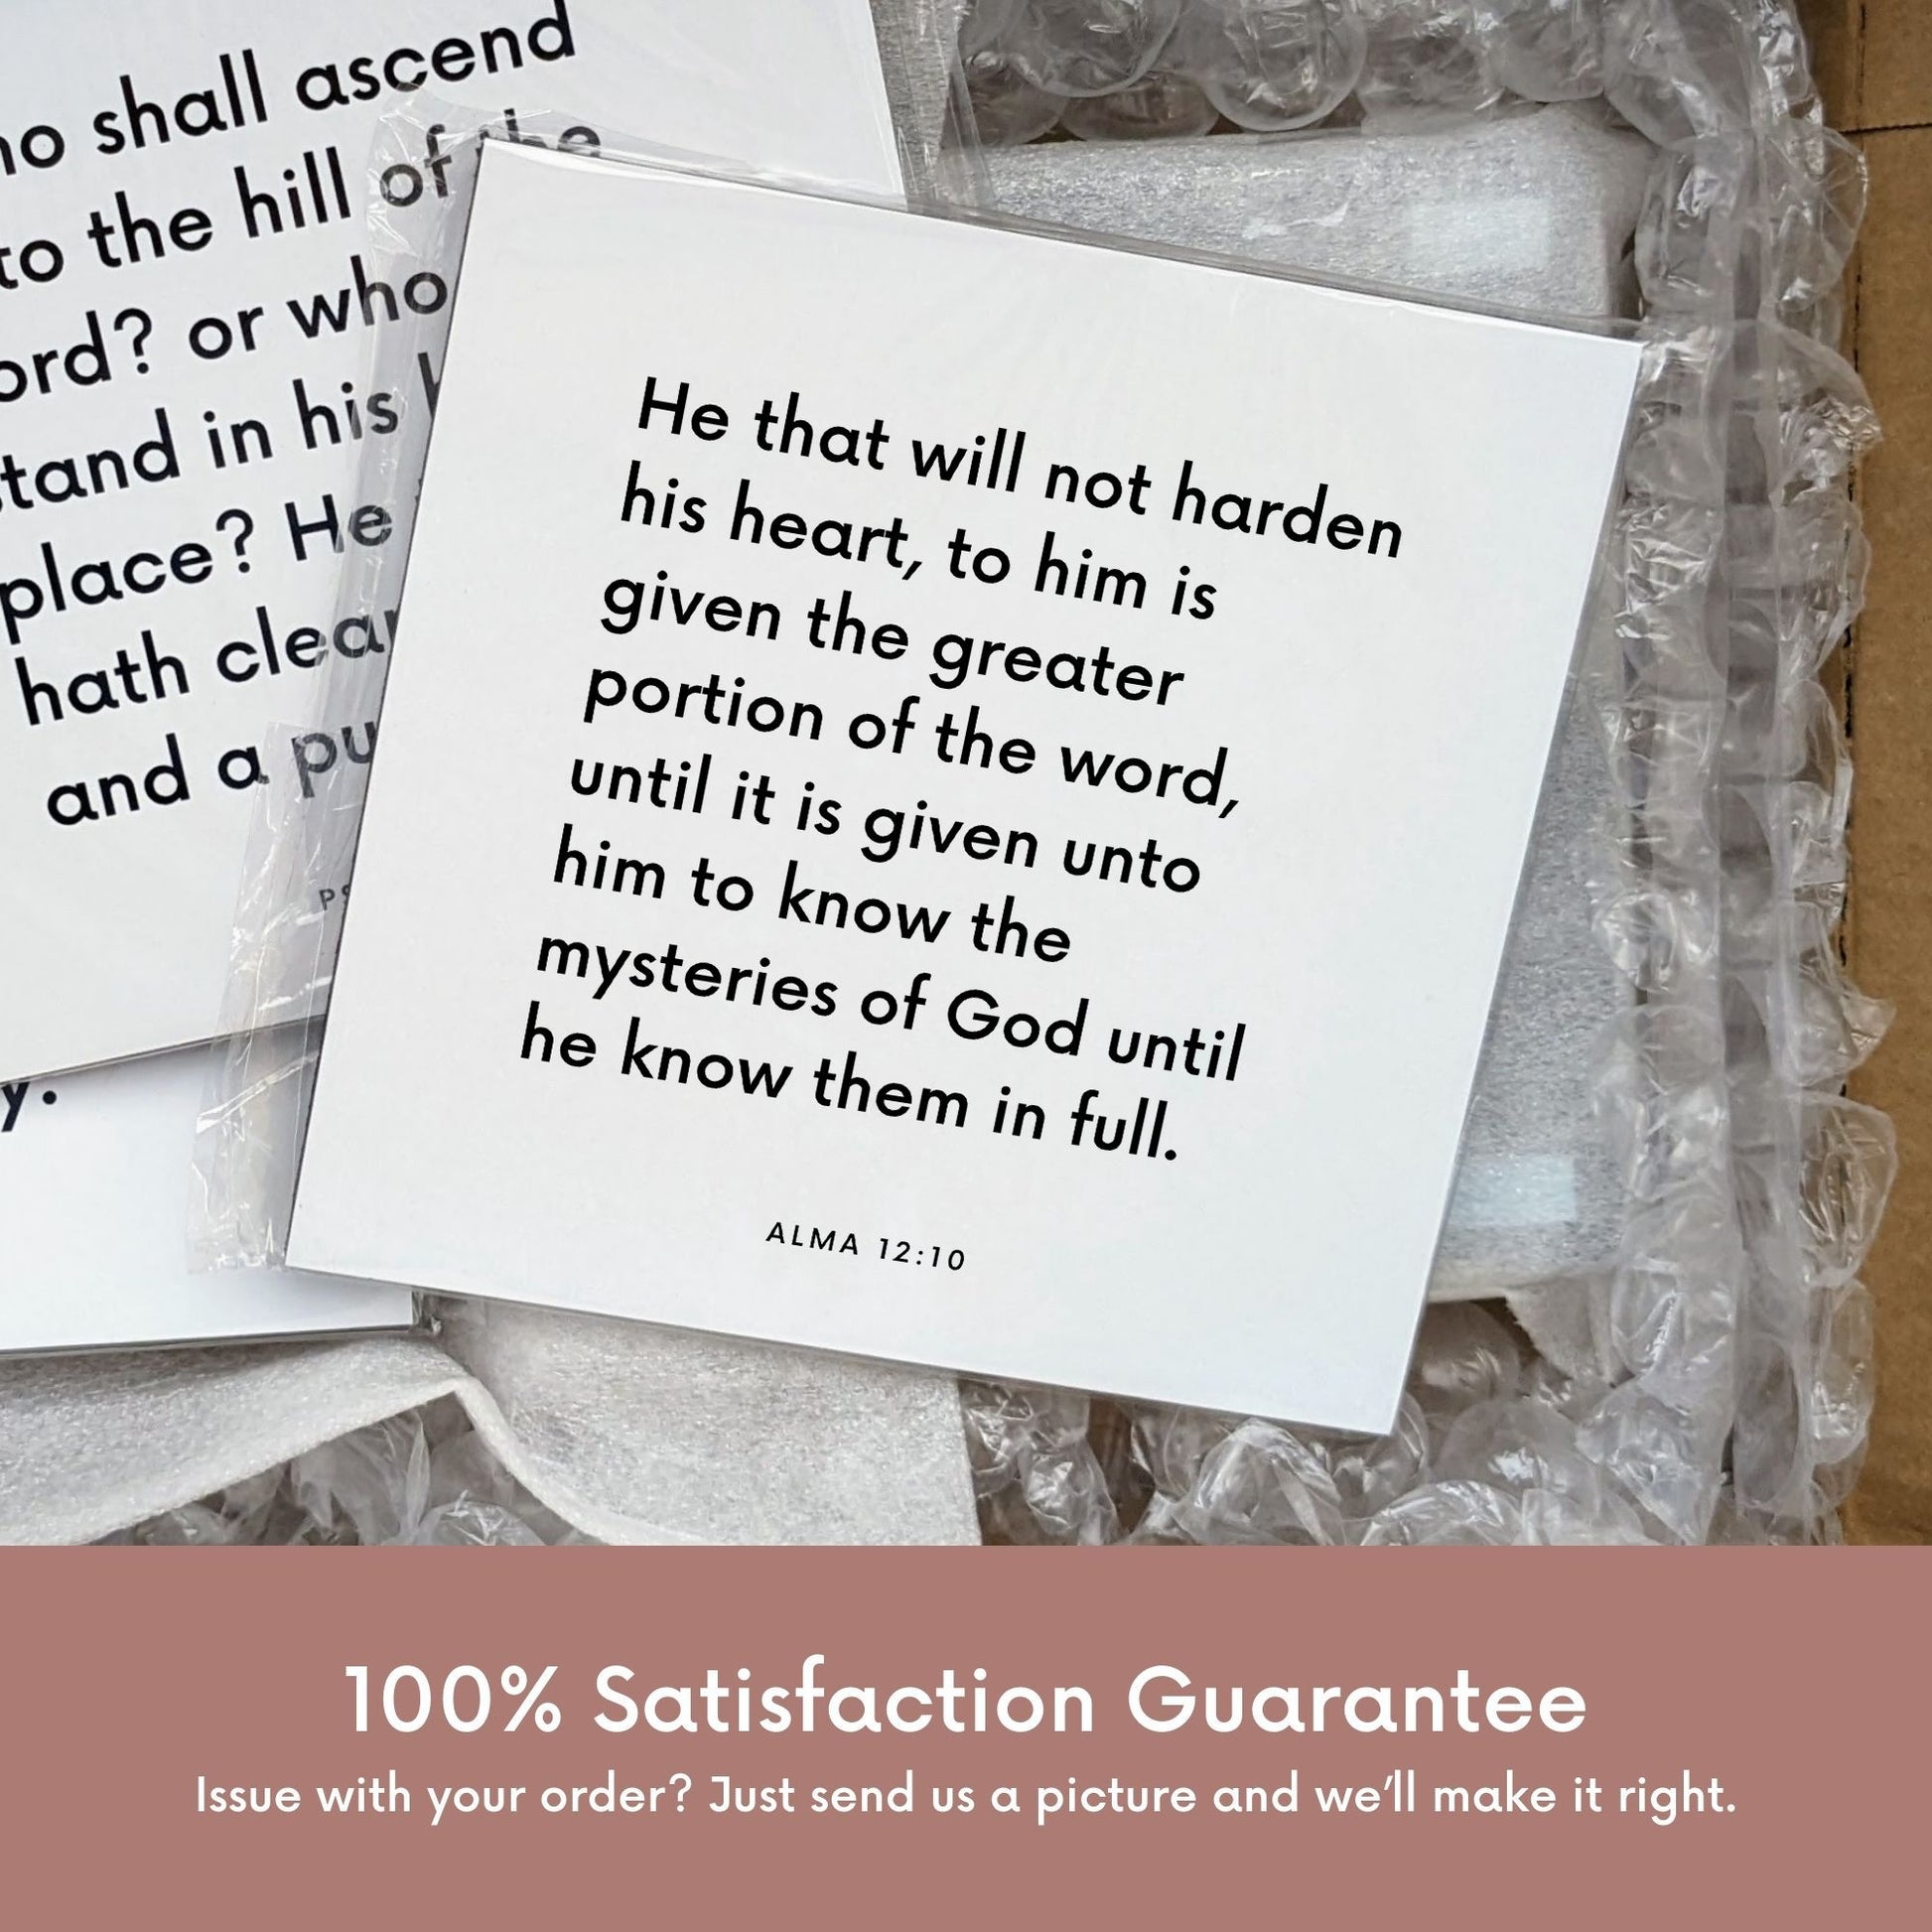 Shipping materials for scripture tile of Alma 12:10 - "He that will not harden his heart"